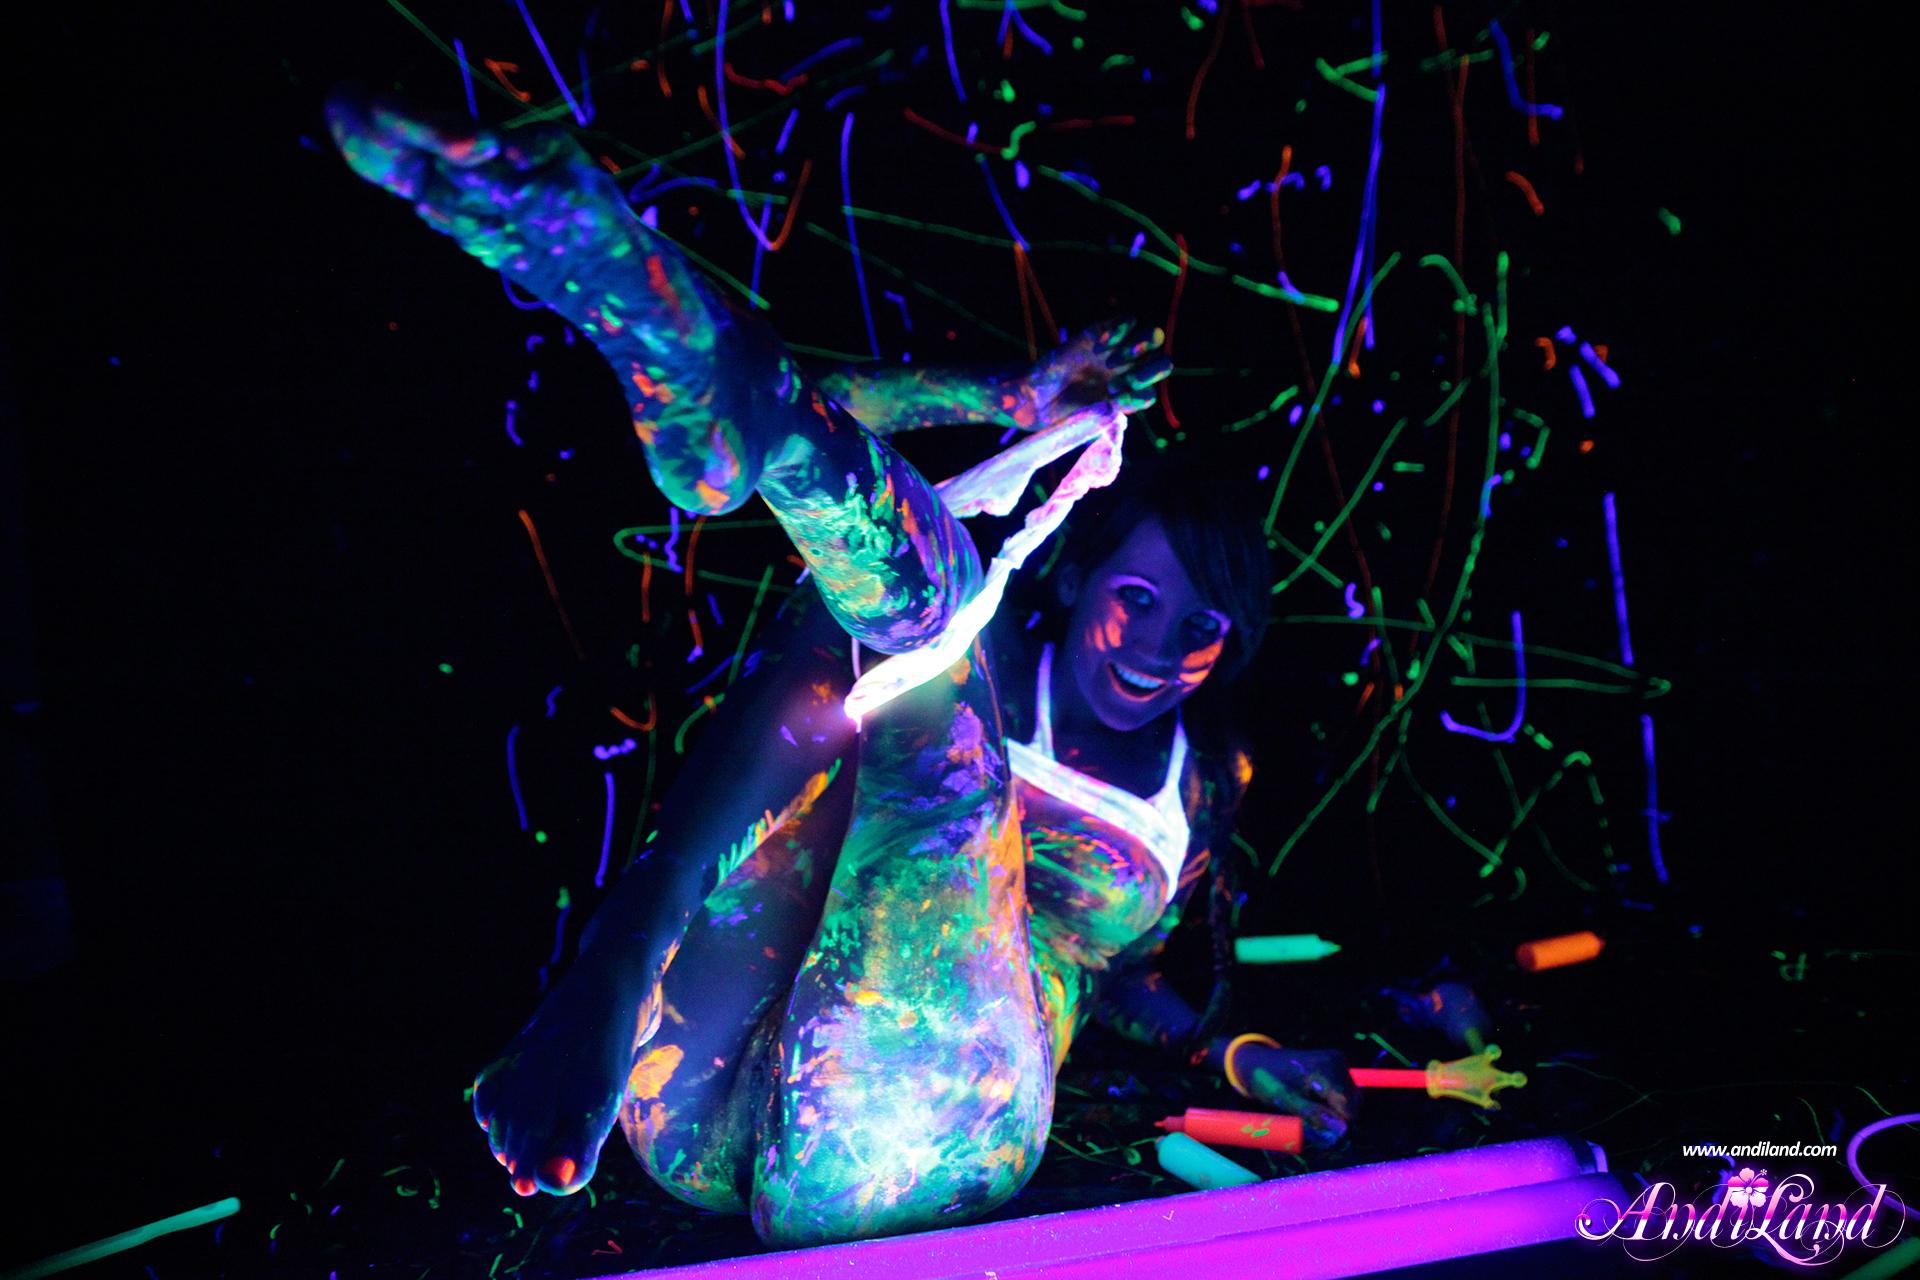 Andi Land gets super kinky with the black light and neon body paint #53134426